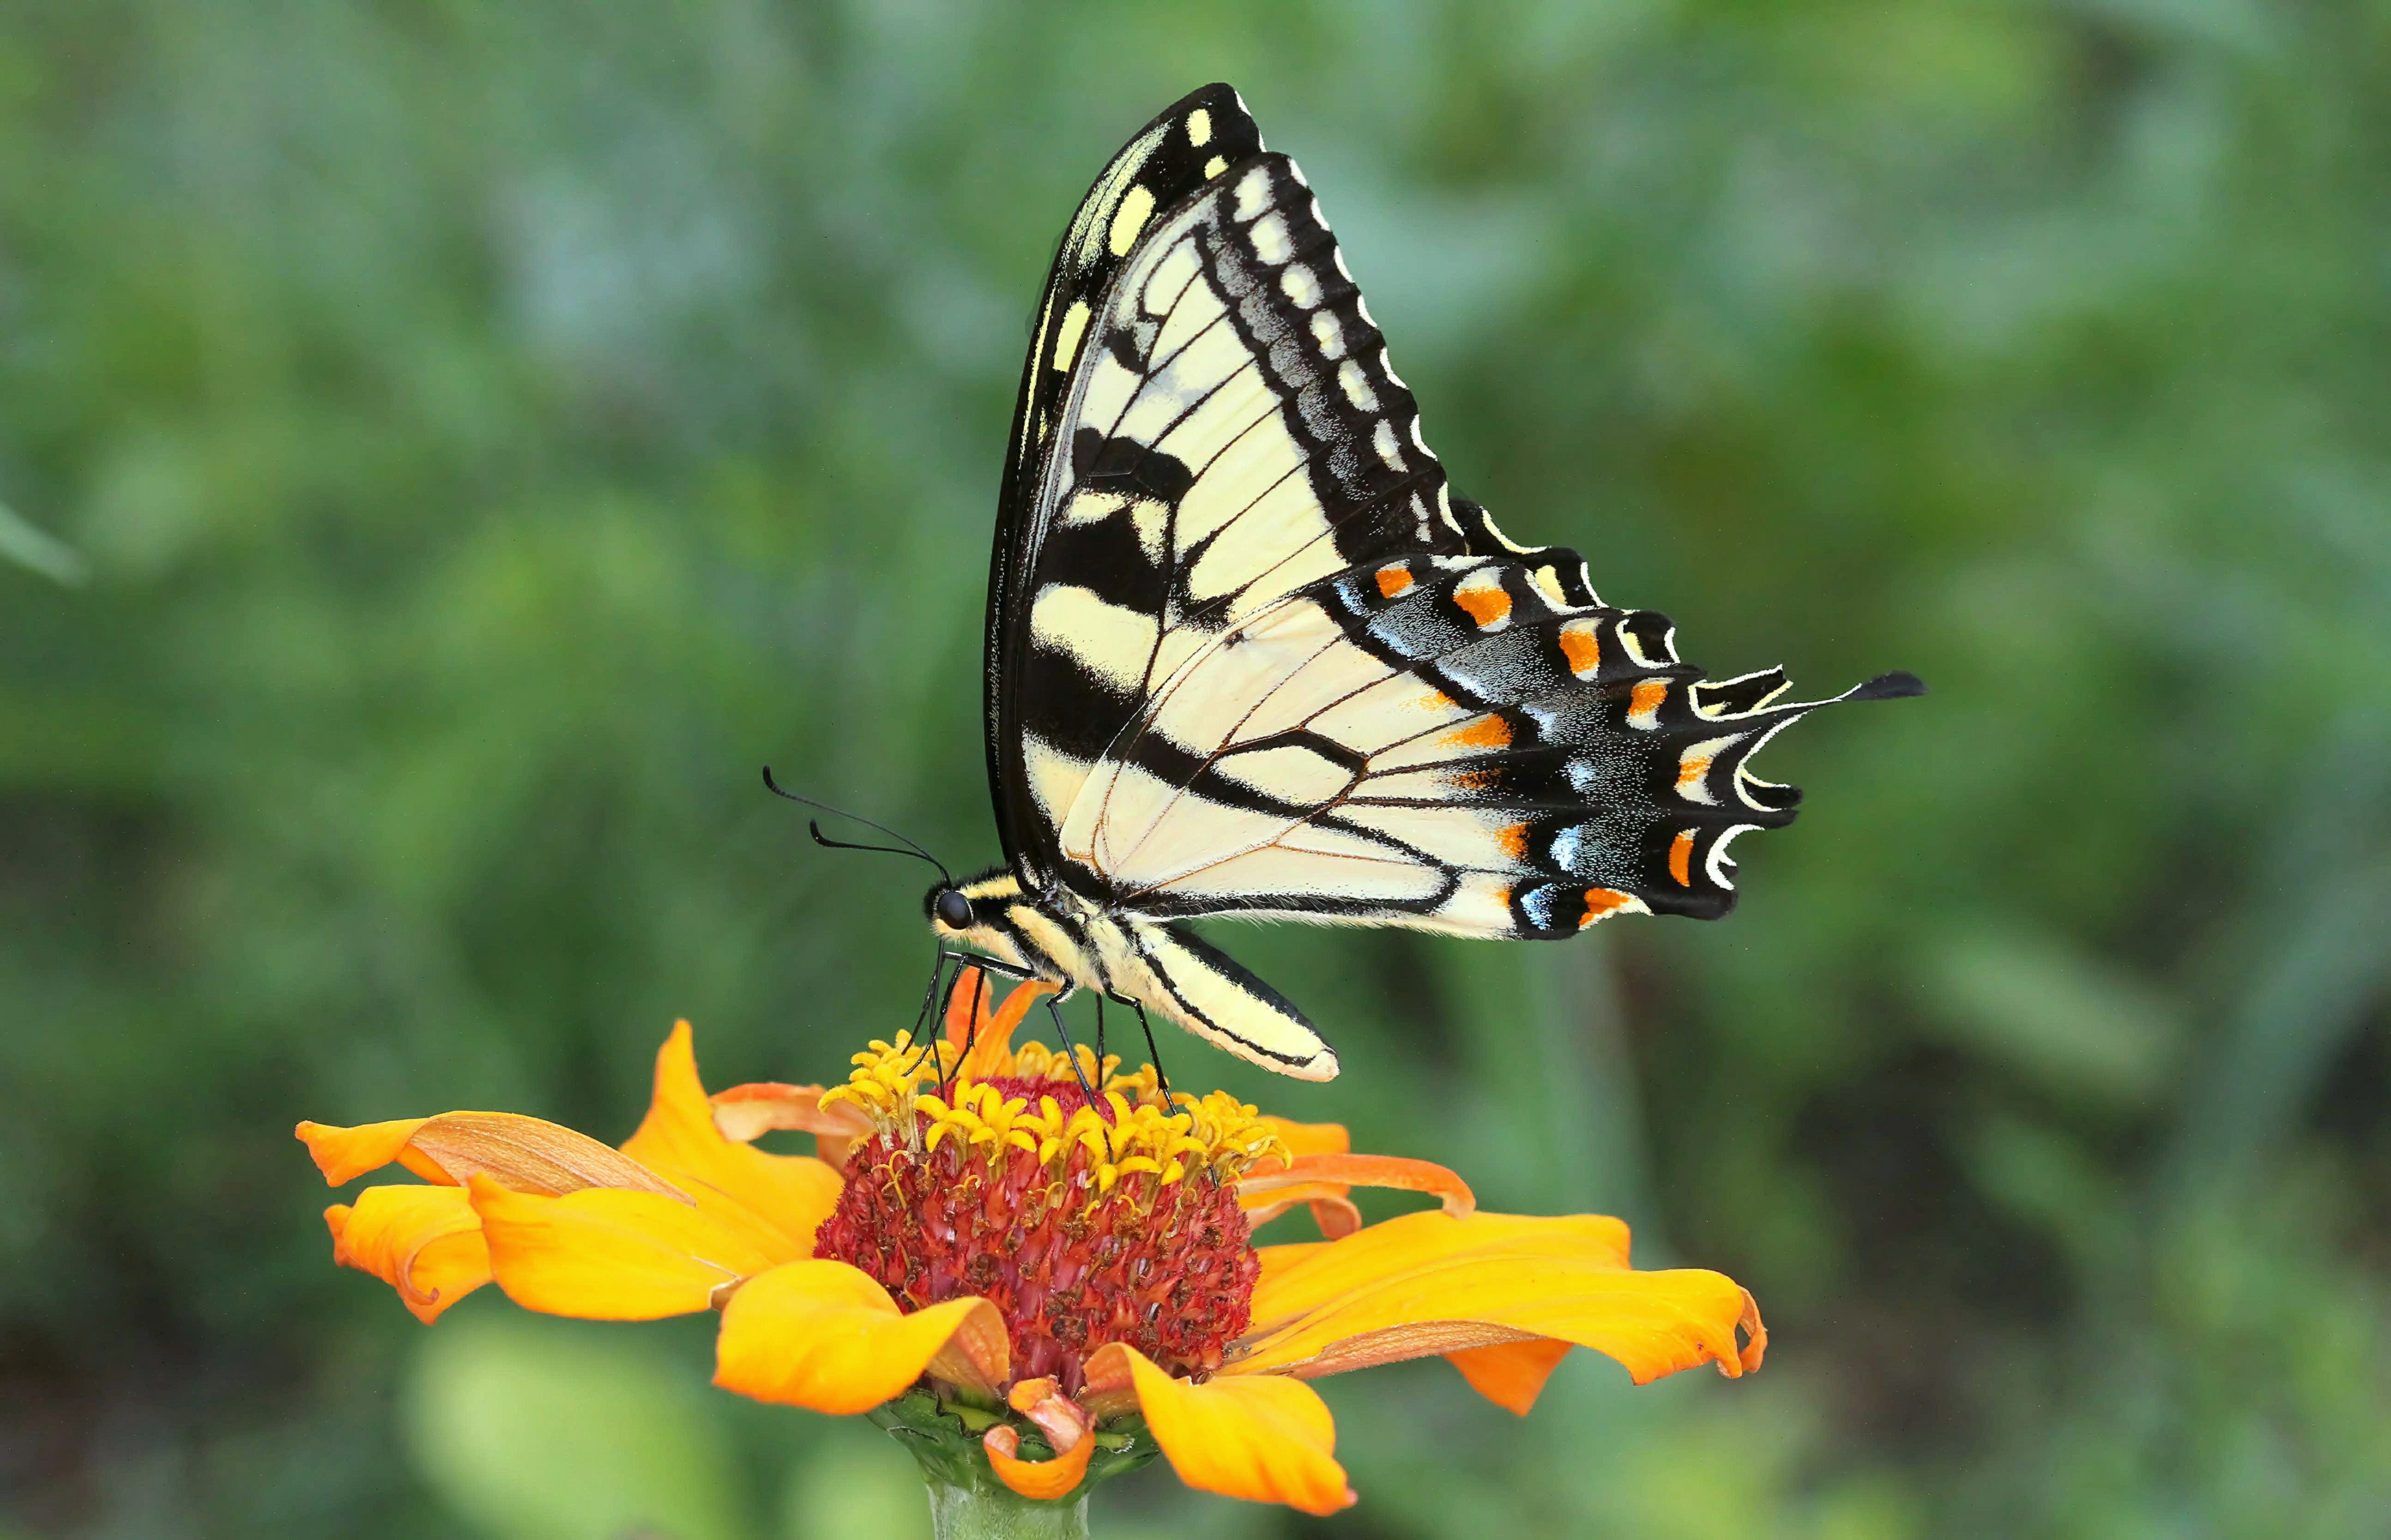 Tiger Swallowtail Butterfly perched on yellow flower